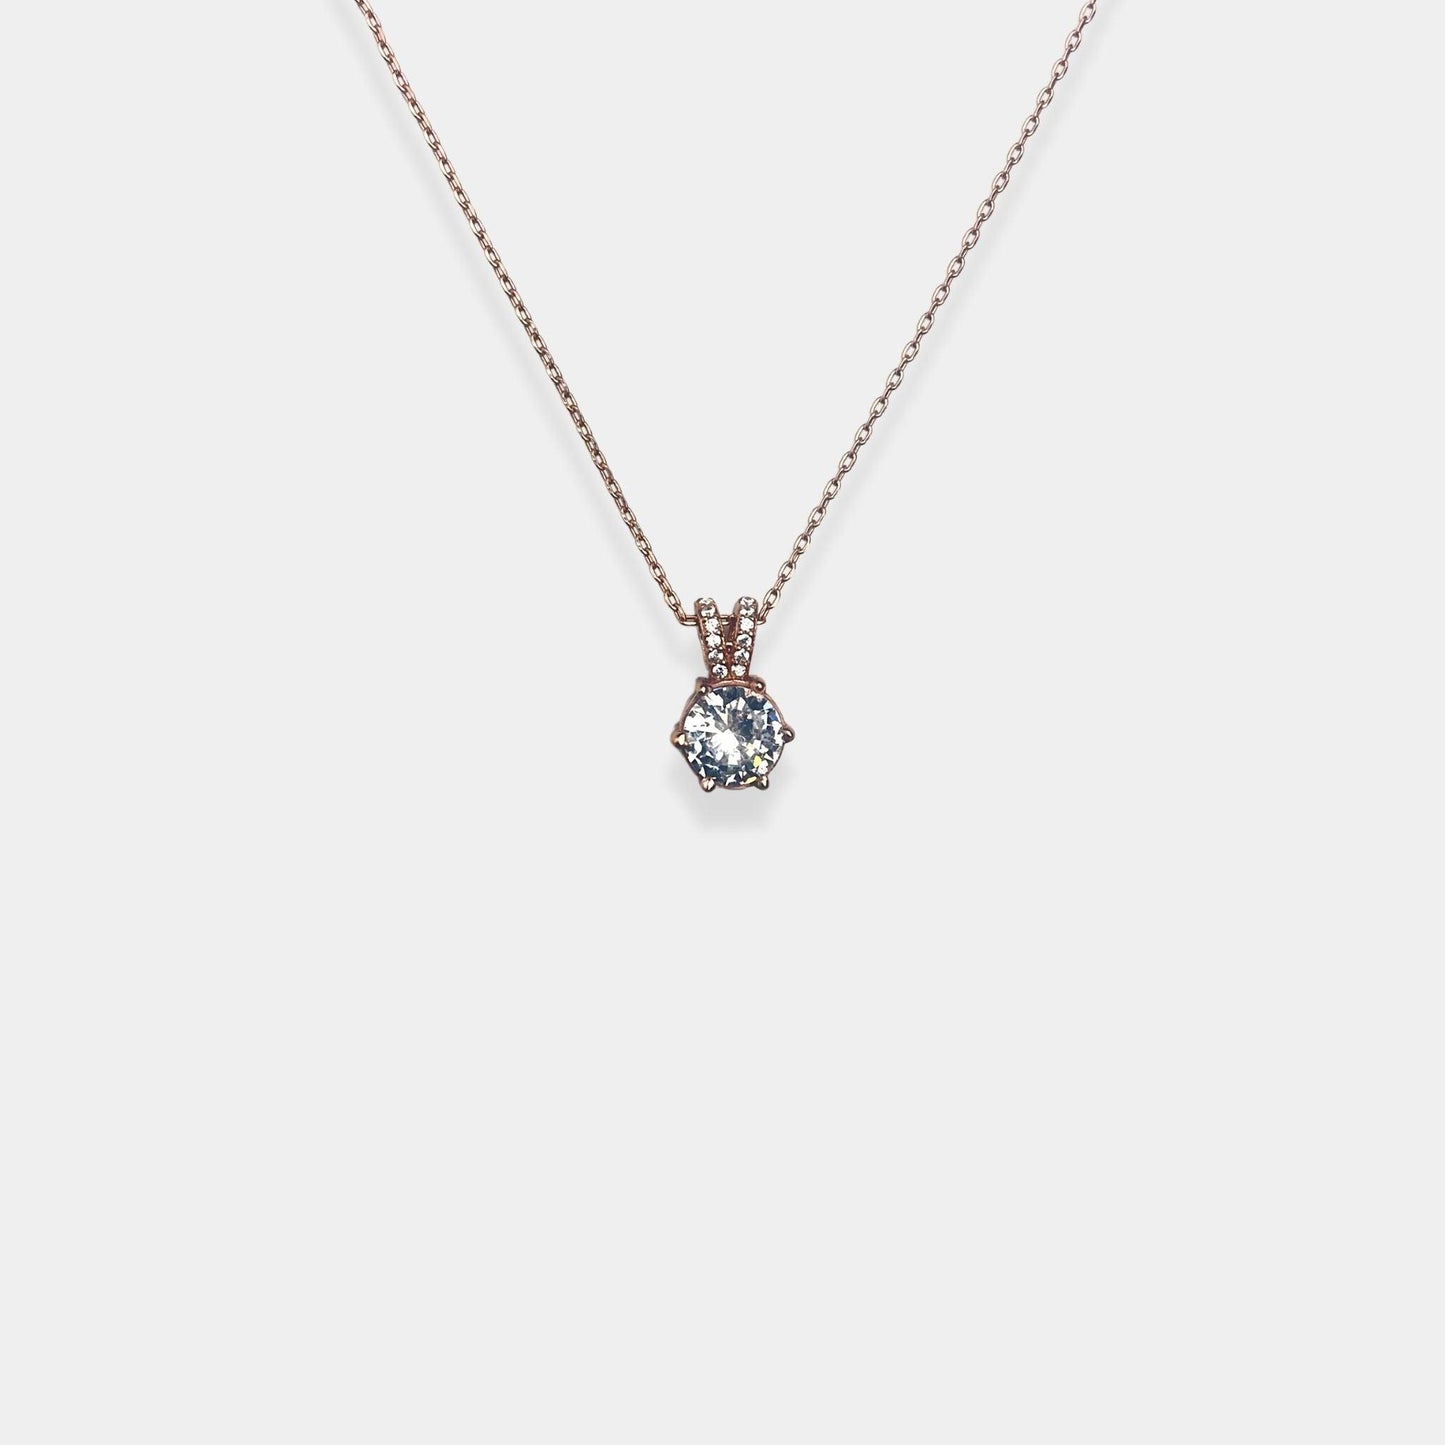 Elevate your style with our exquisite sterling silver necklace featuring a gracefully hanging sparkling silver pendant.